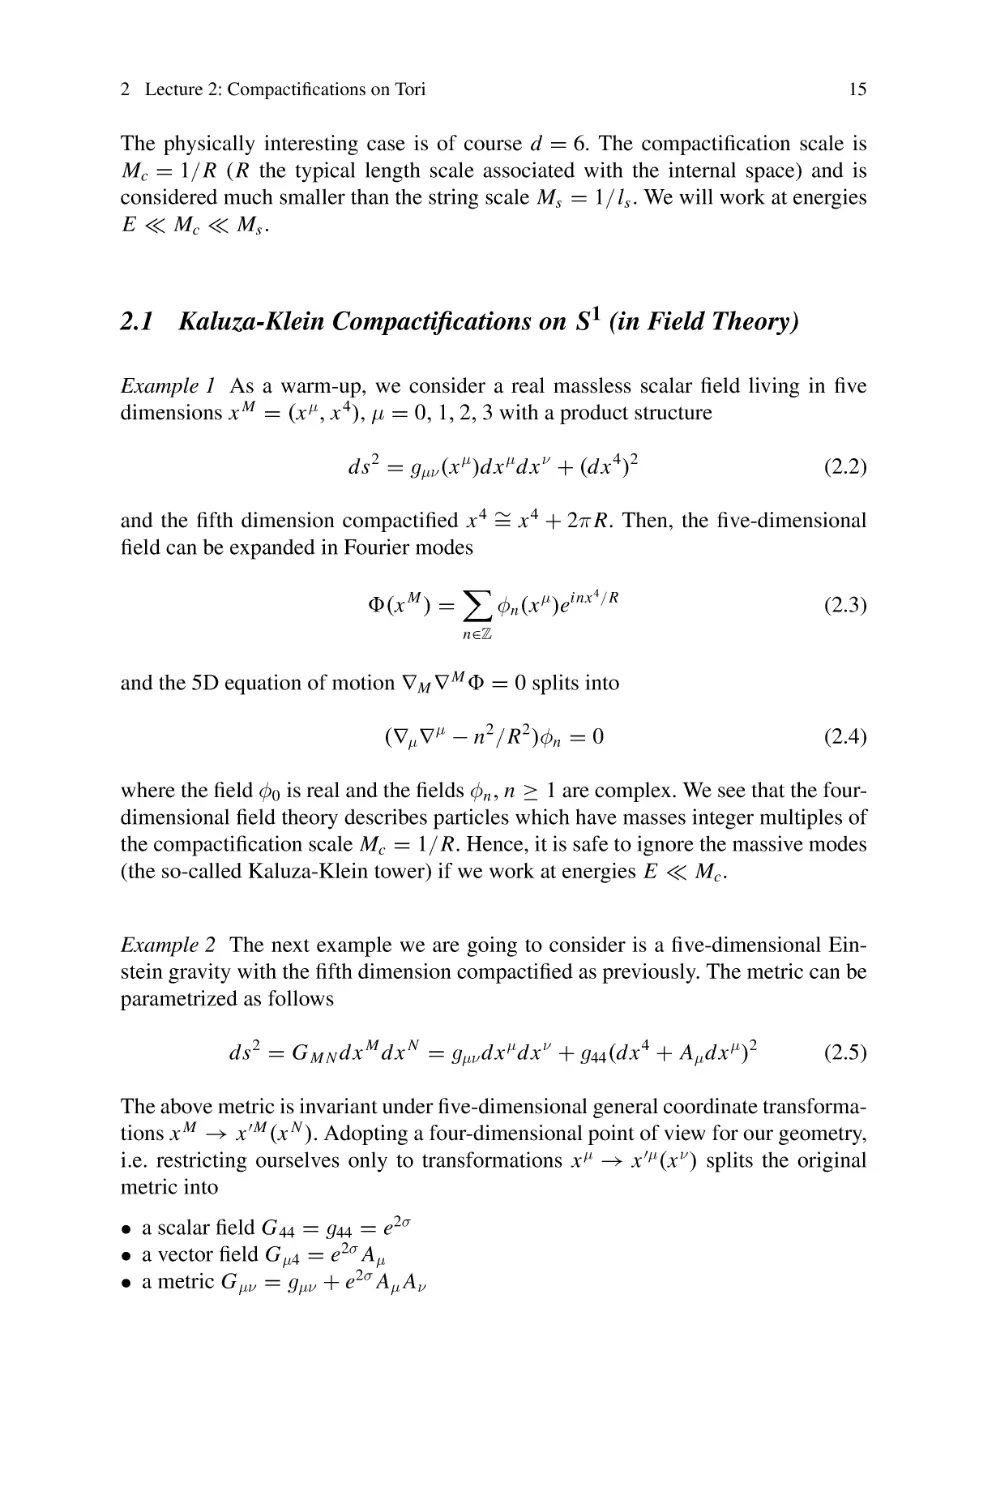 2.1 Kaluza-Klein Compactifications on S1 (in Field Theory)